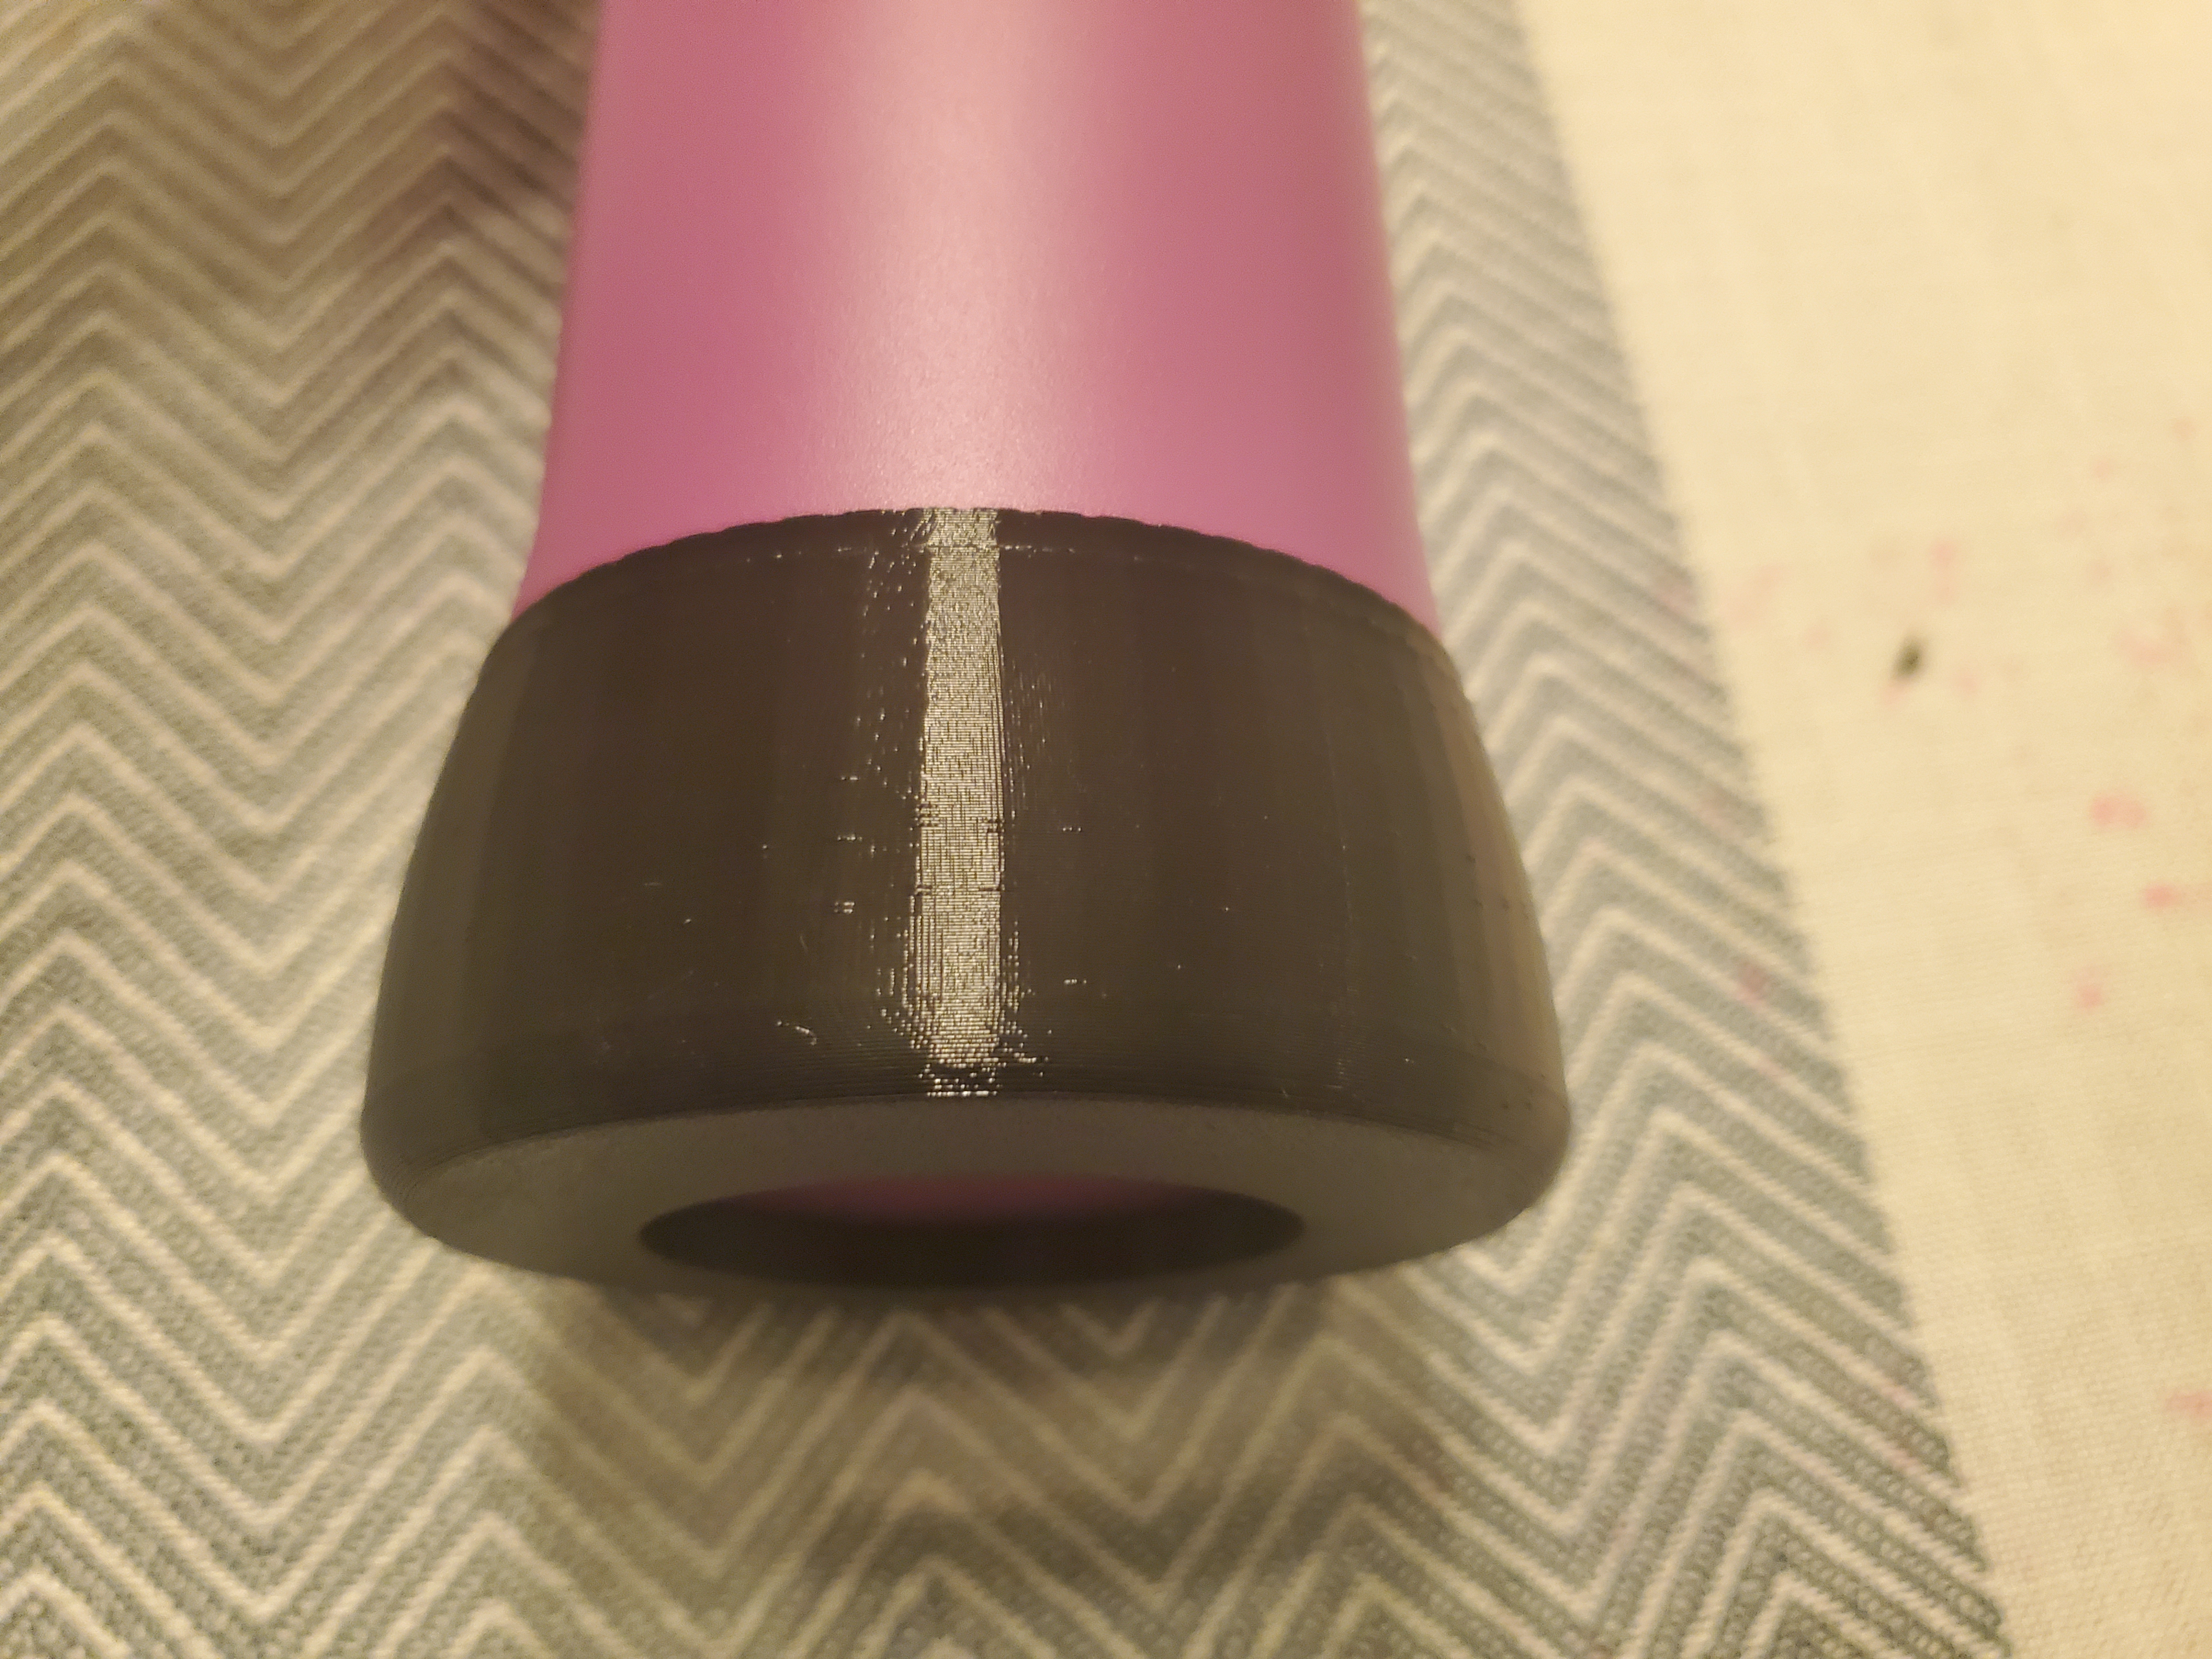 Insulated water bottle bottom protector